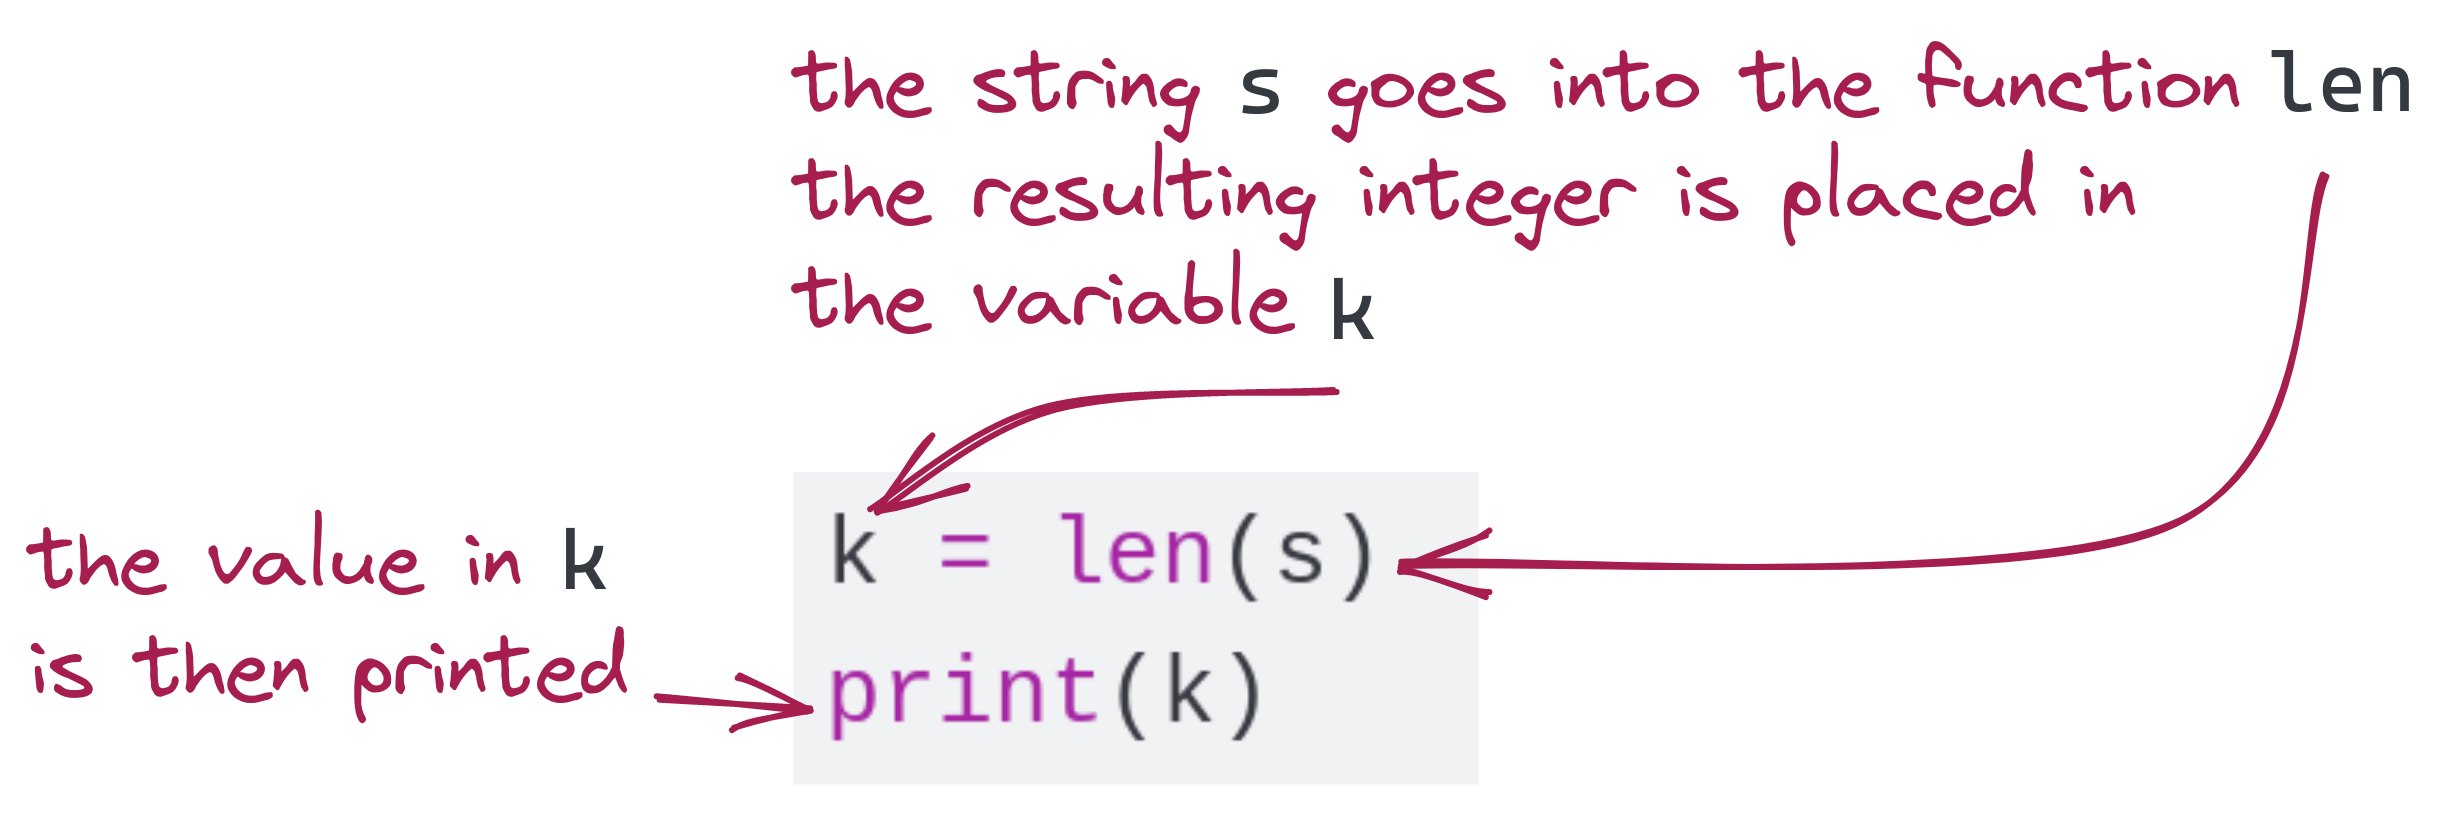 how the len function works